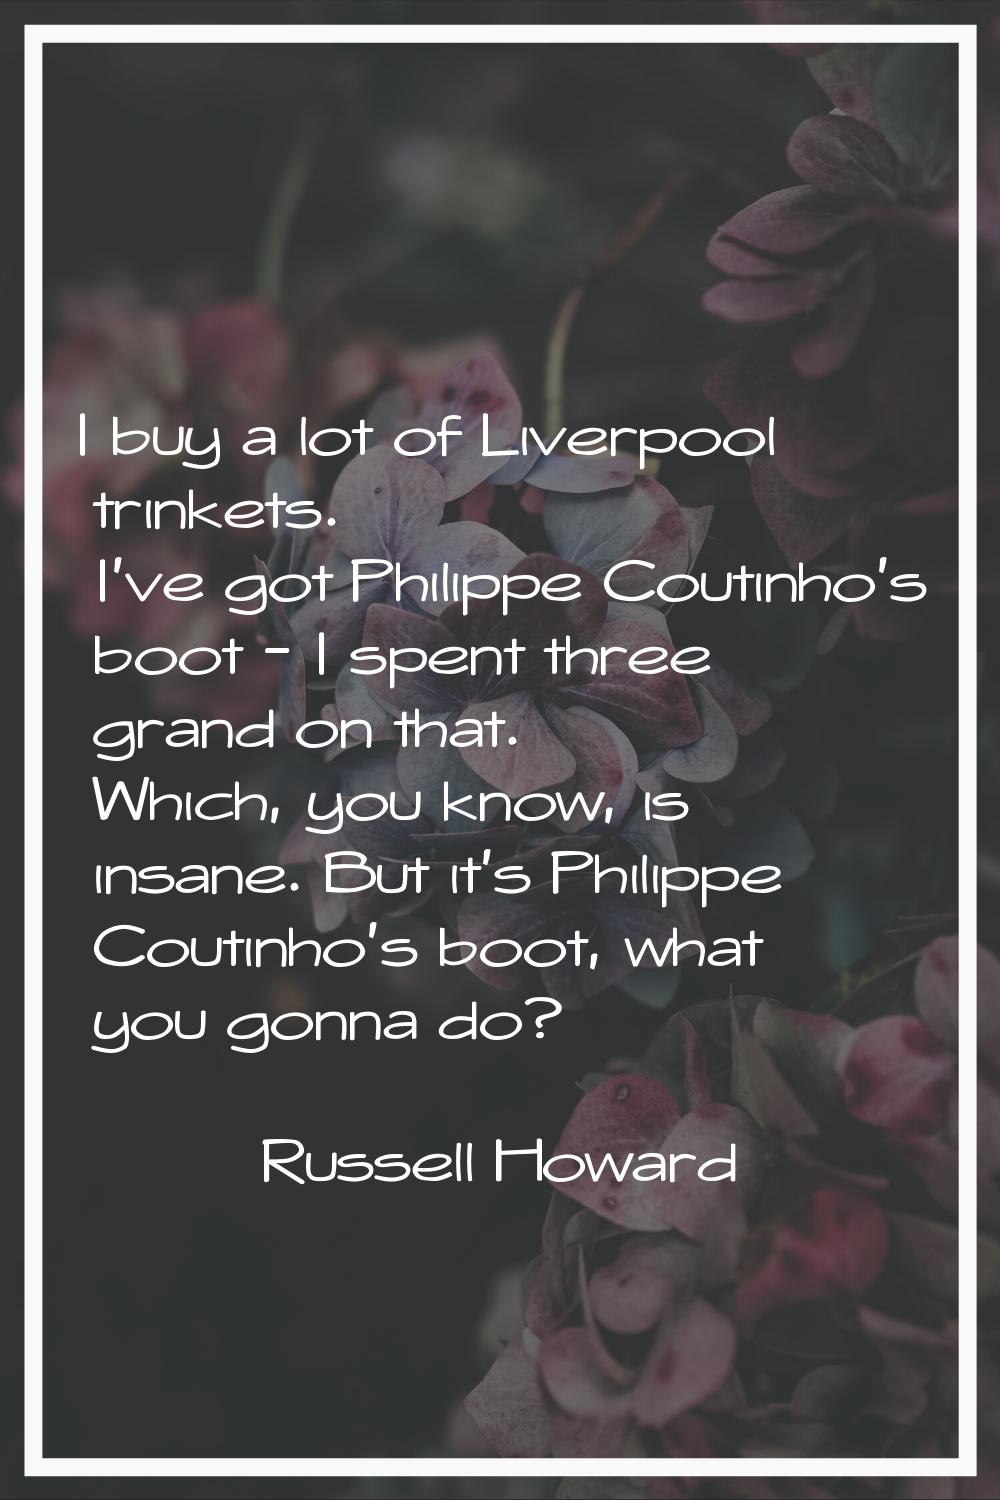 I buy a lot of Liverpool trinkets. I've got Philippe Coutinho's boot - I spent three grand on that.